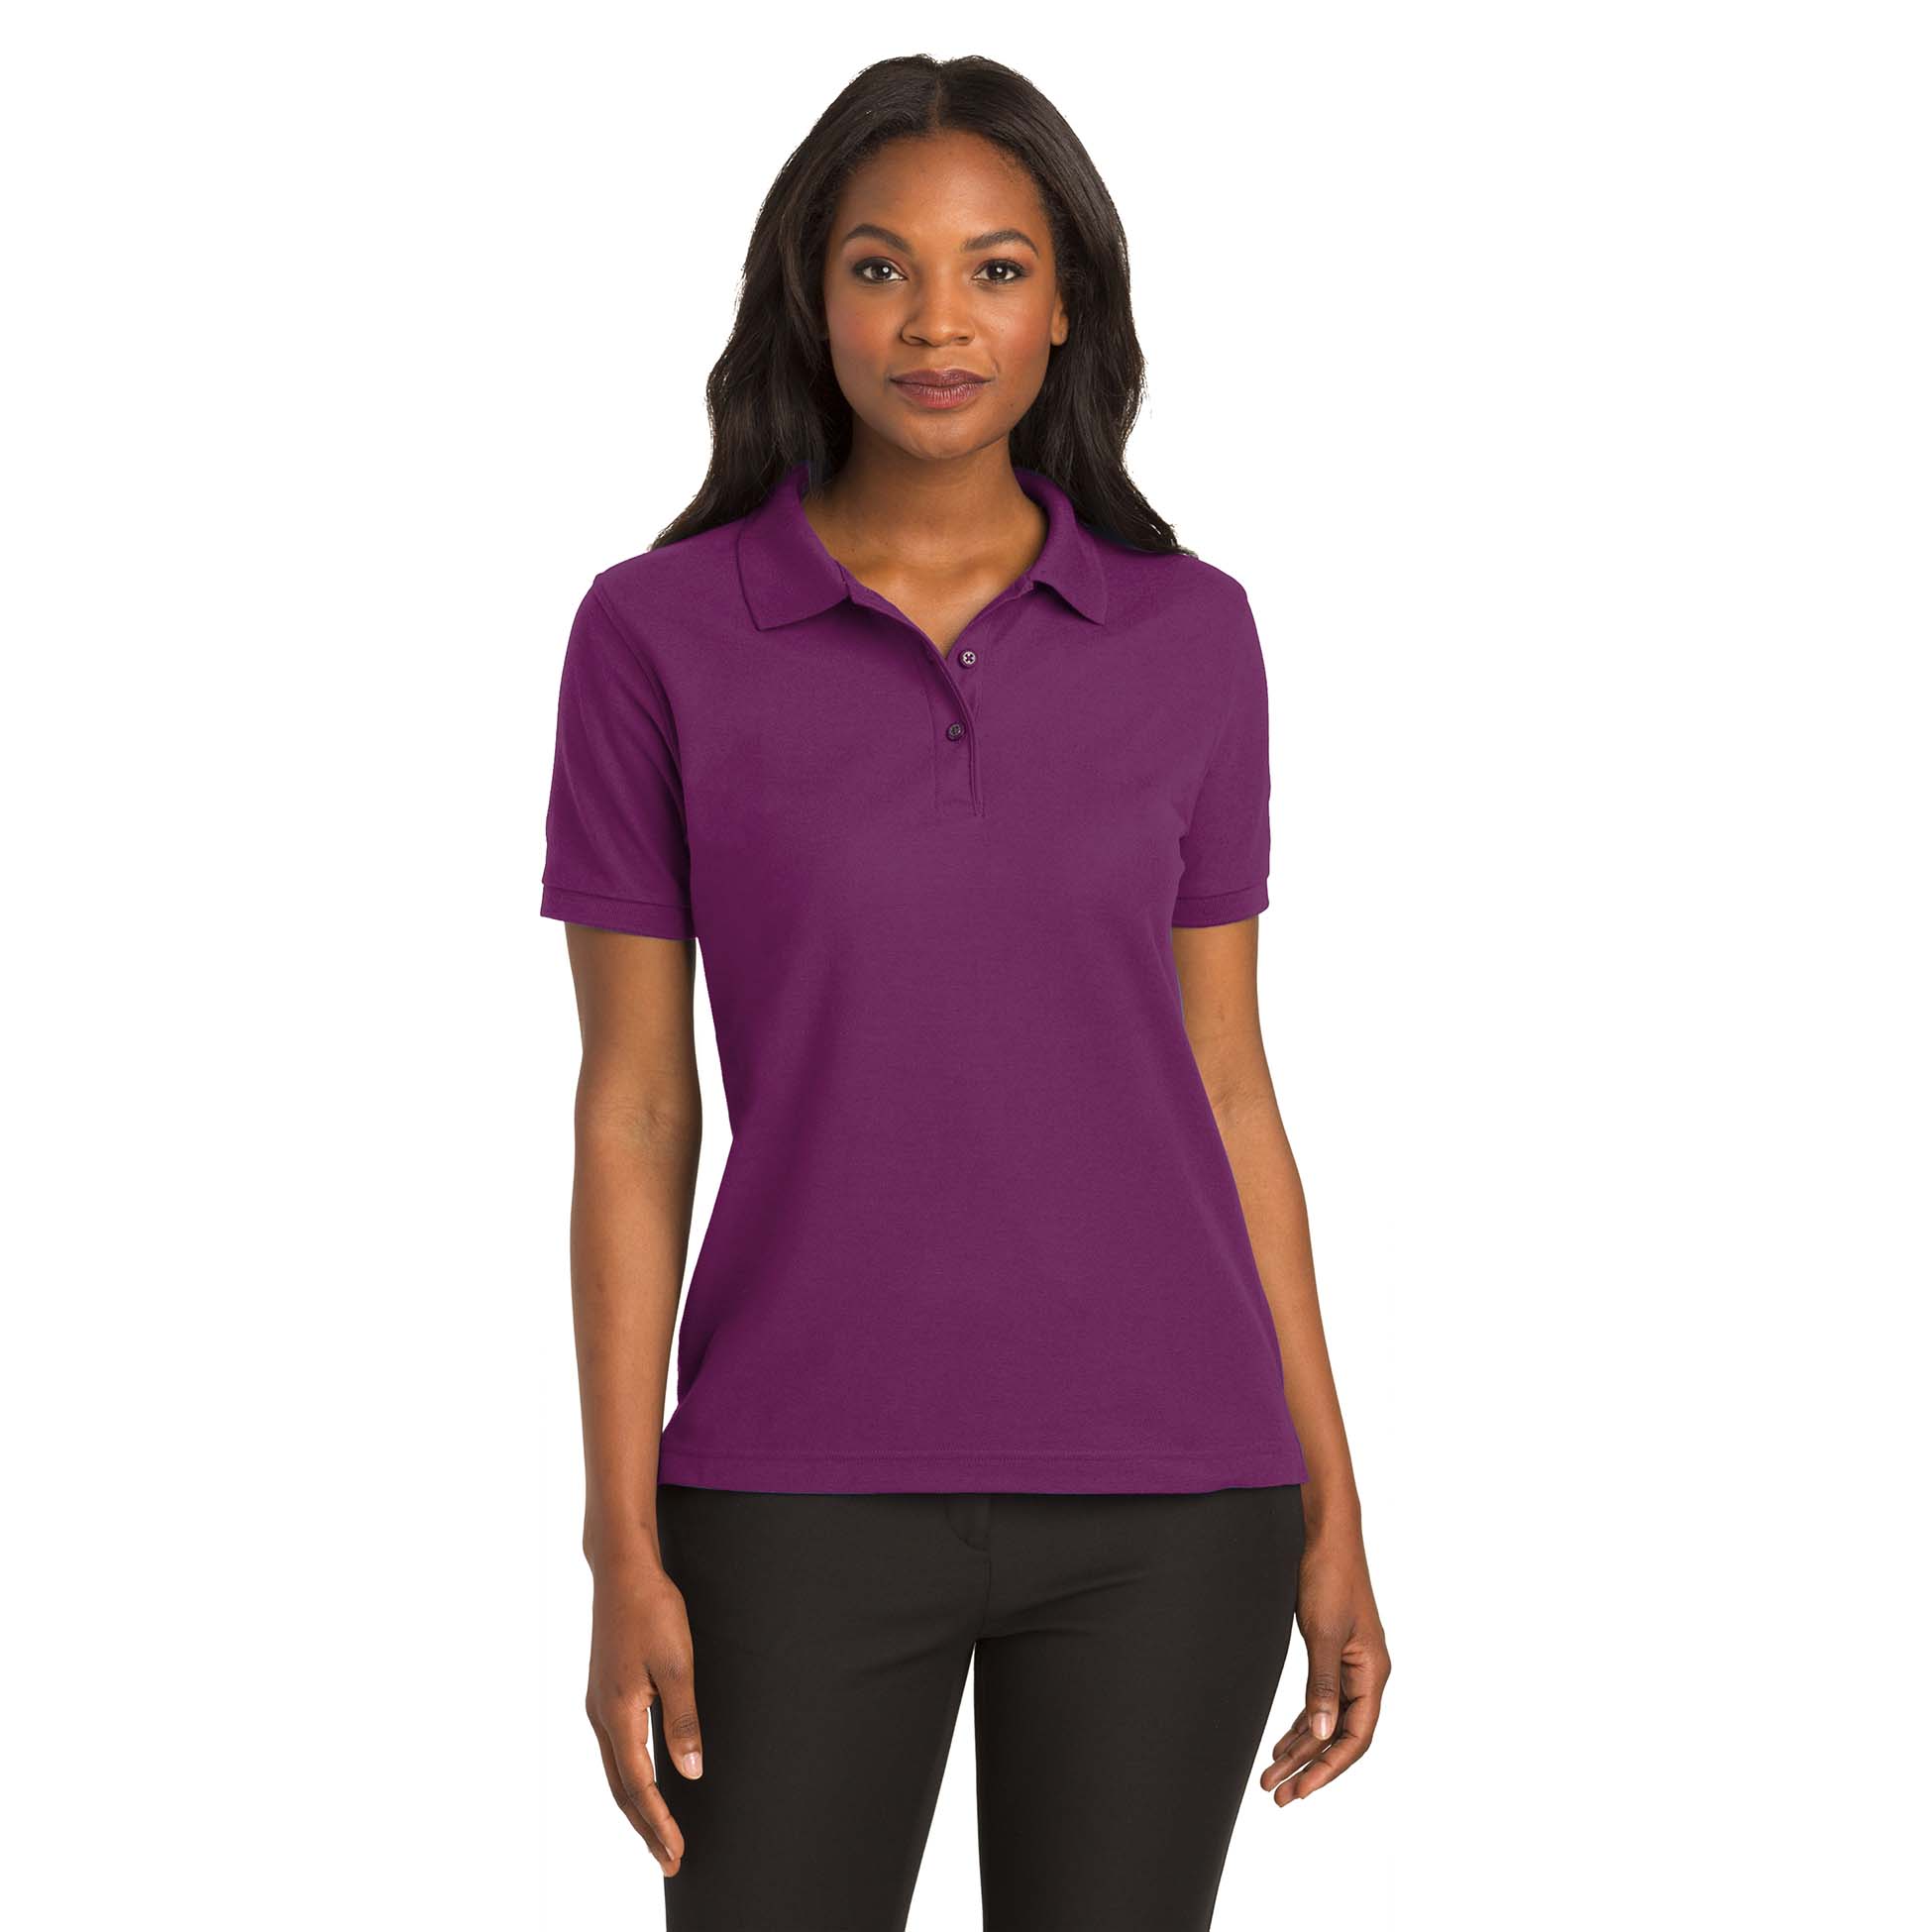 Port Authority Silk Touch Polo K500 Mens 